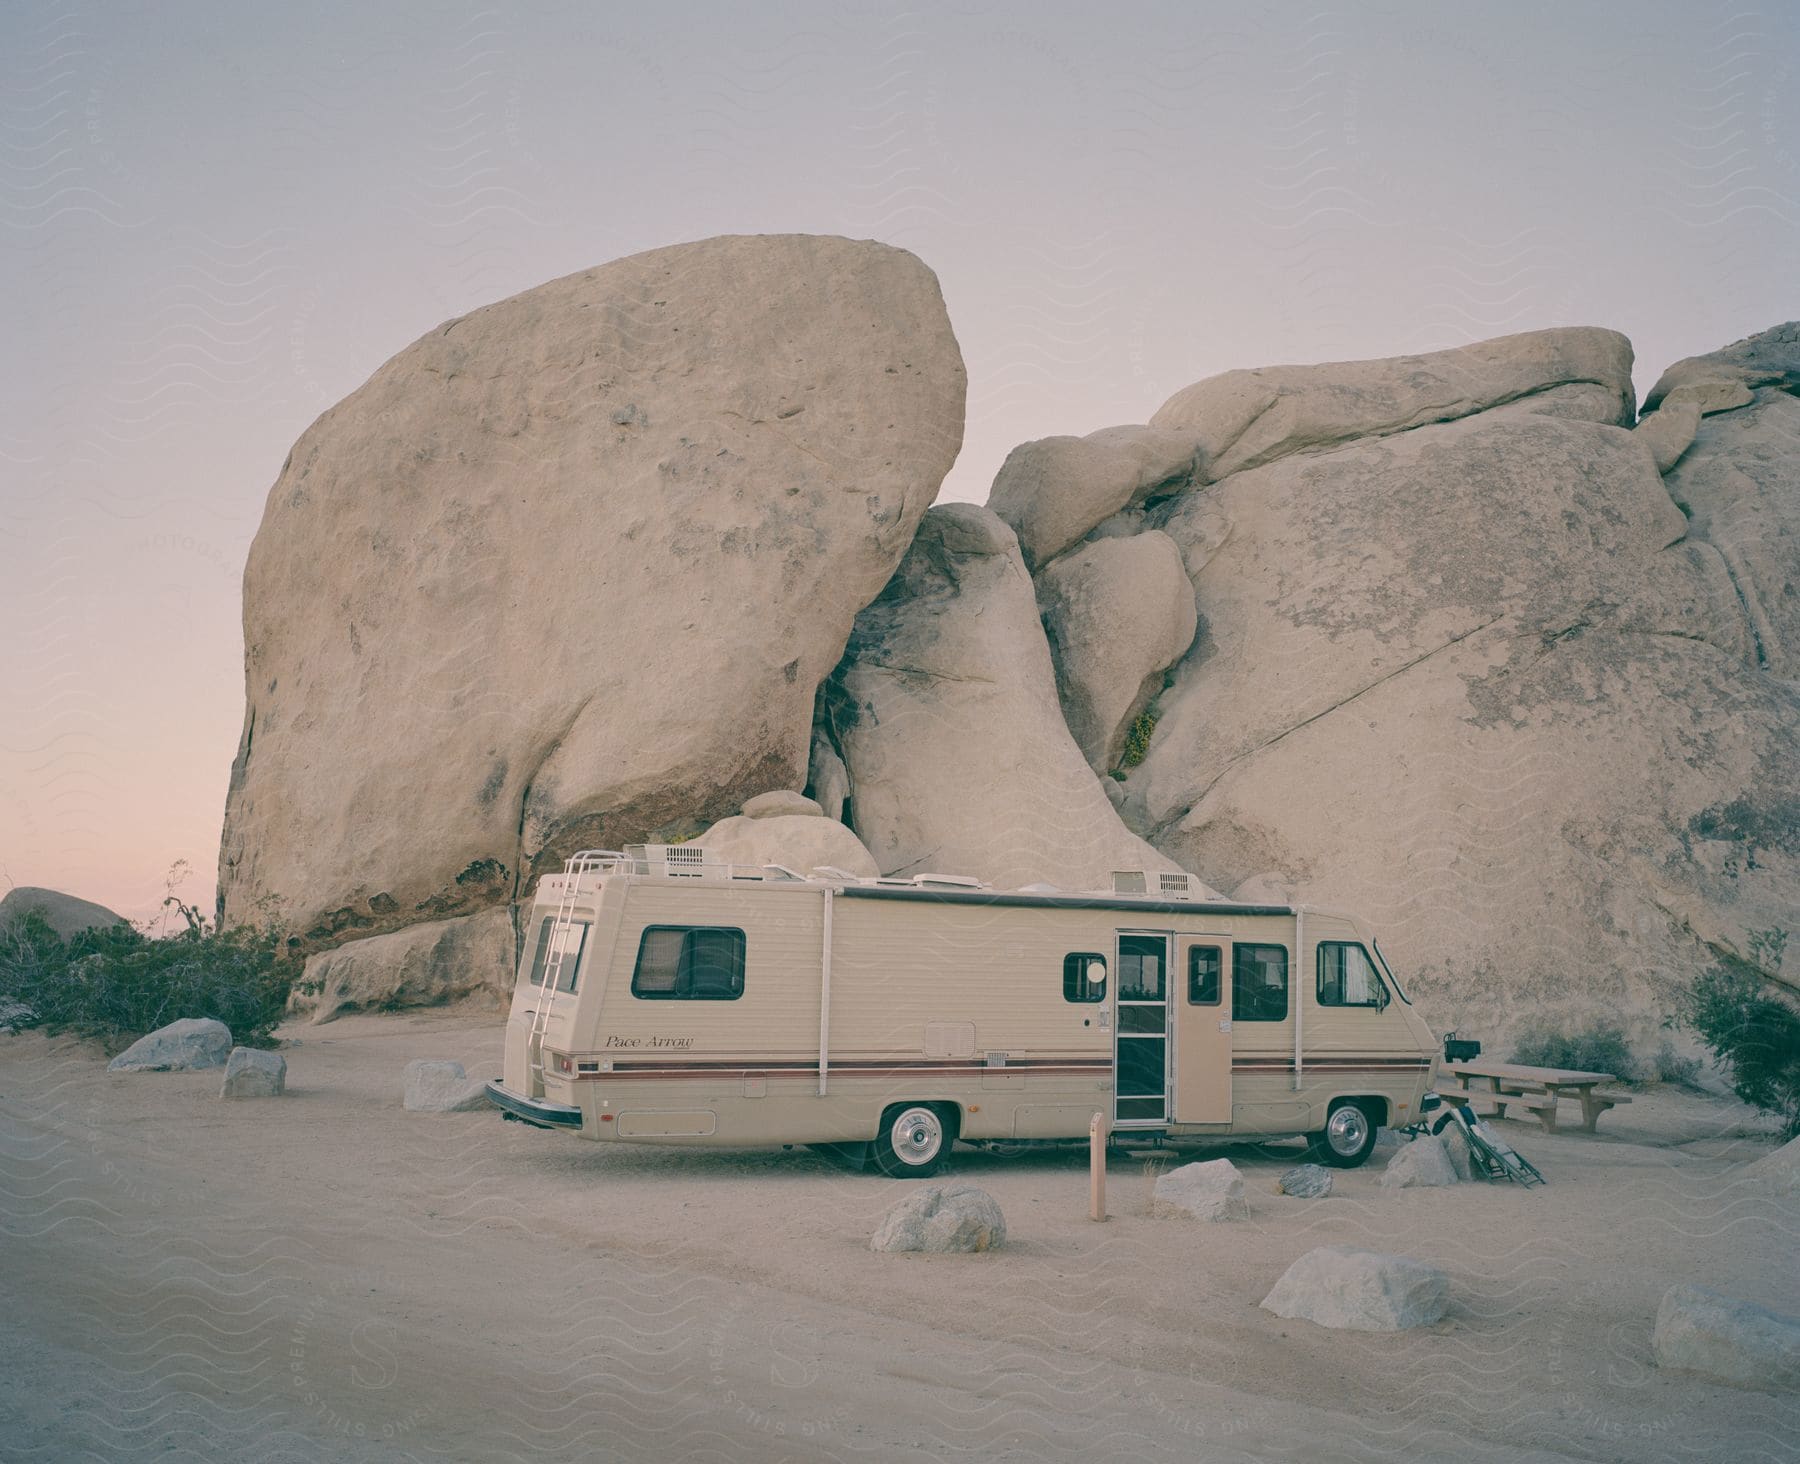 A motorhome parked near a large rock in a natural outdoor setting